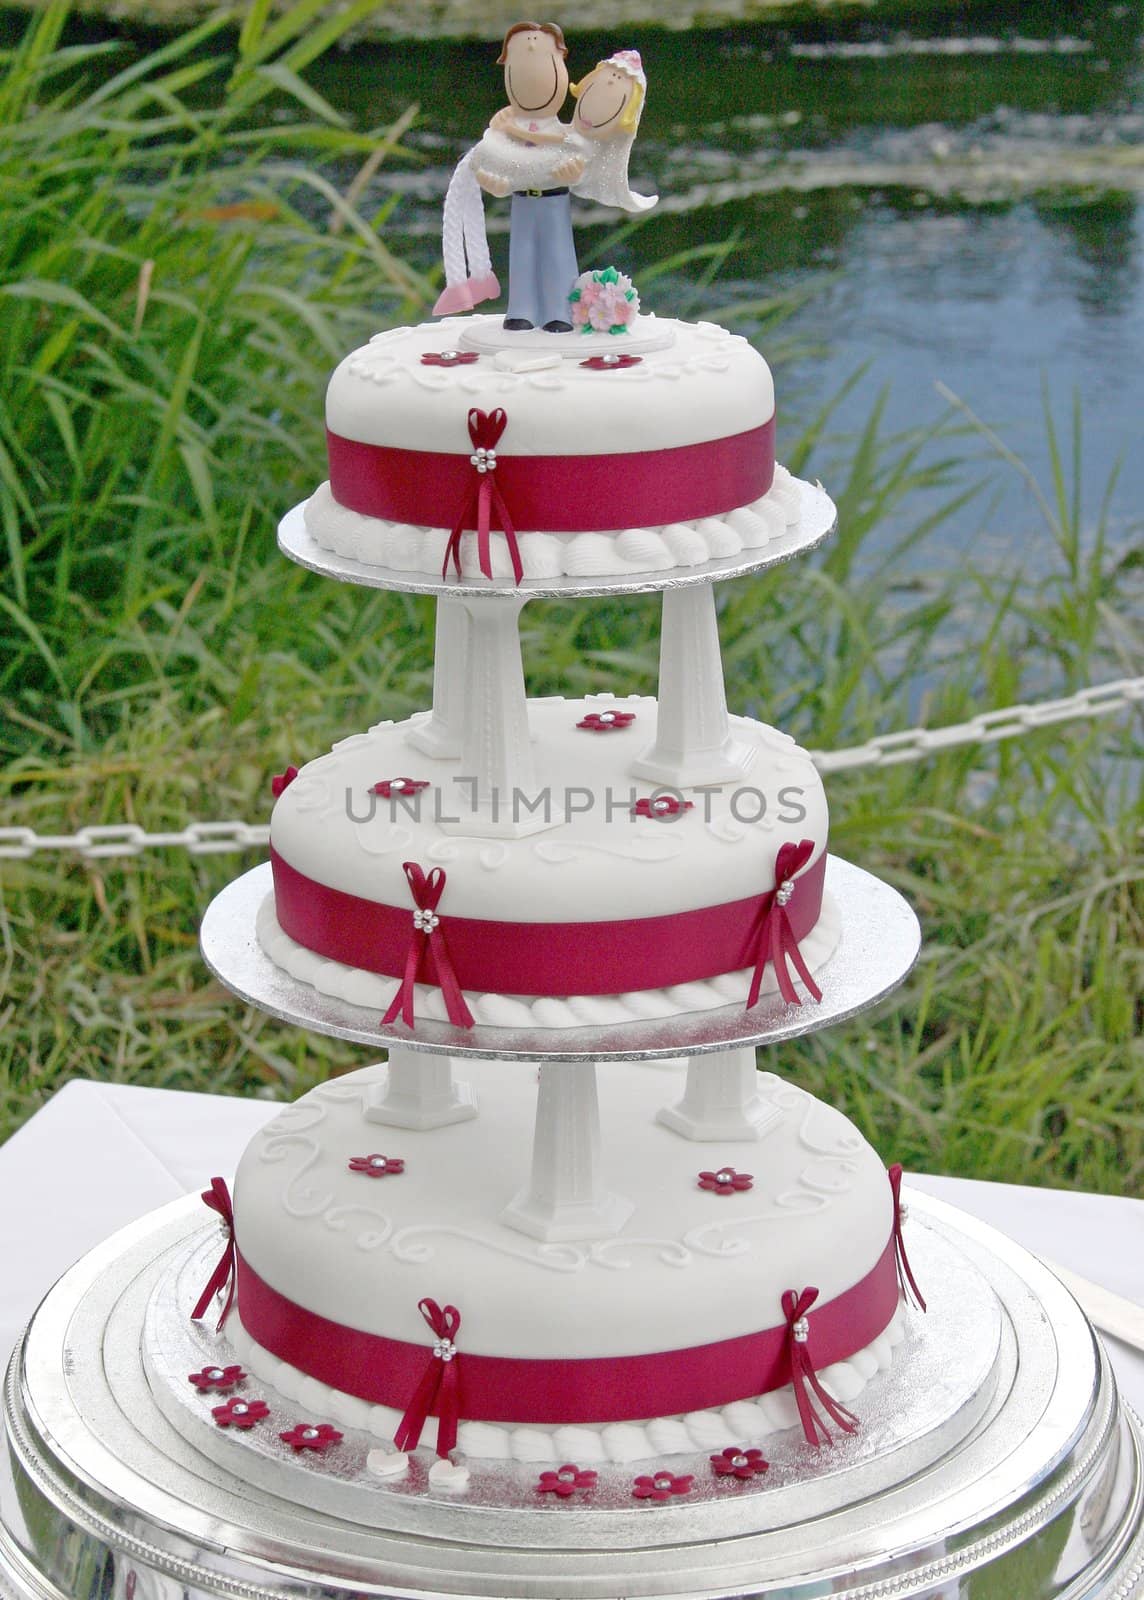 Wedding Cake with Bride and Groom and lake behind.